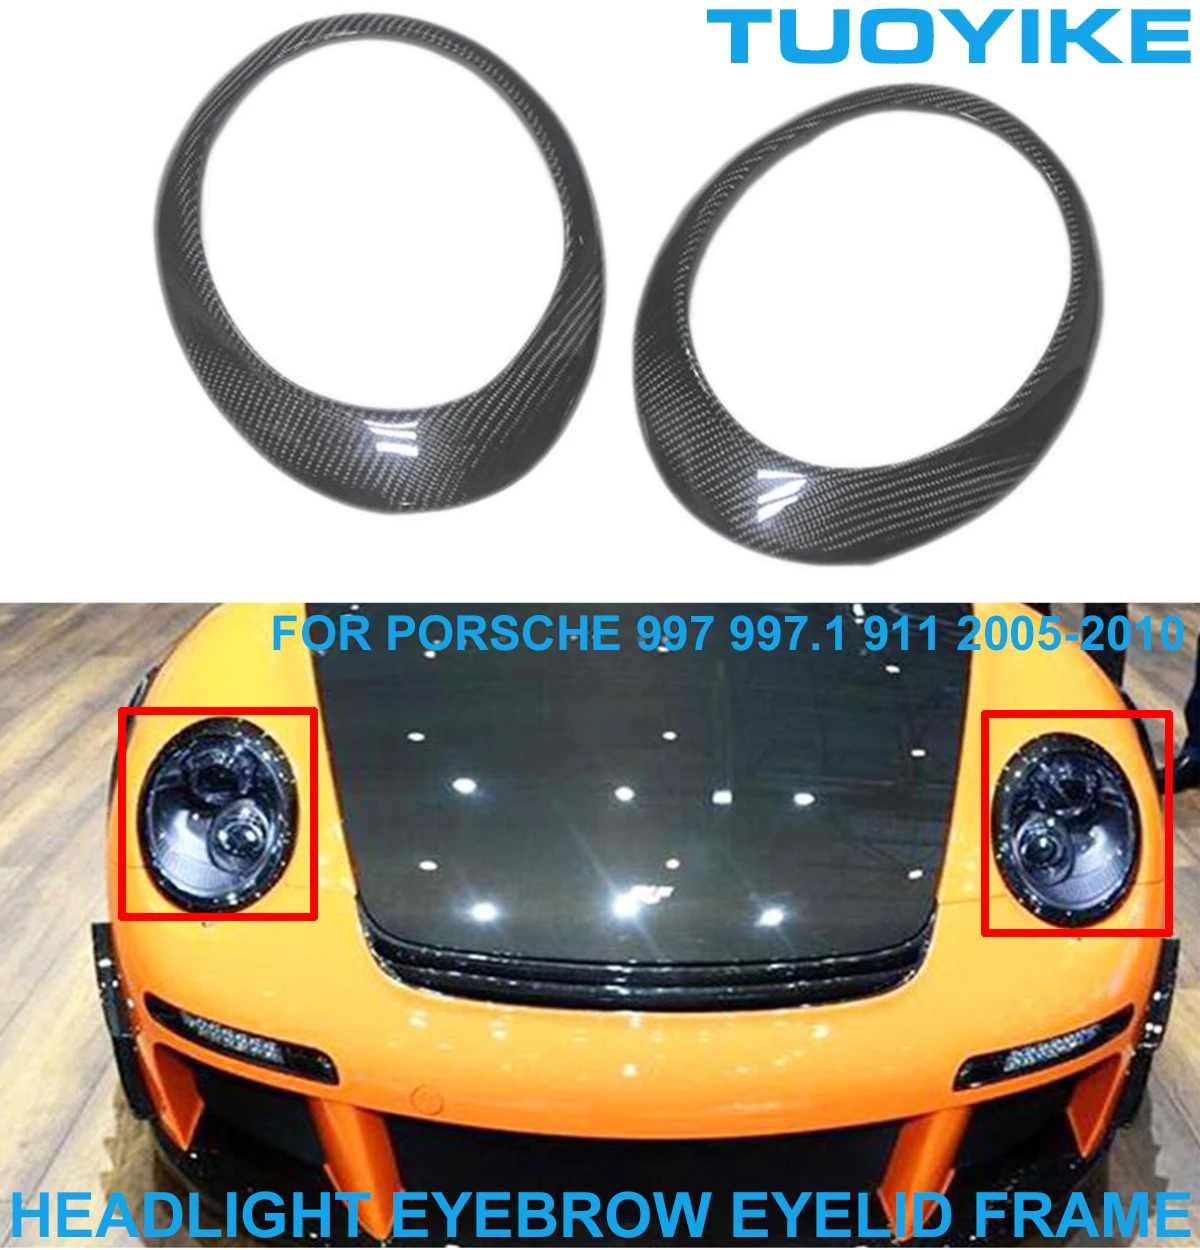 

2PCS Car Styling Real Dry Carbon Fiber Front Headlight Eyebrows Eyelids Frame Cover Trim Sticker For Porsche 997 997.1 911 05-10